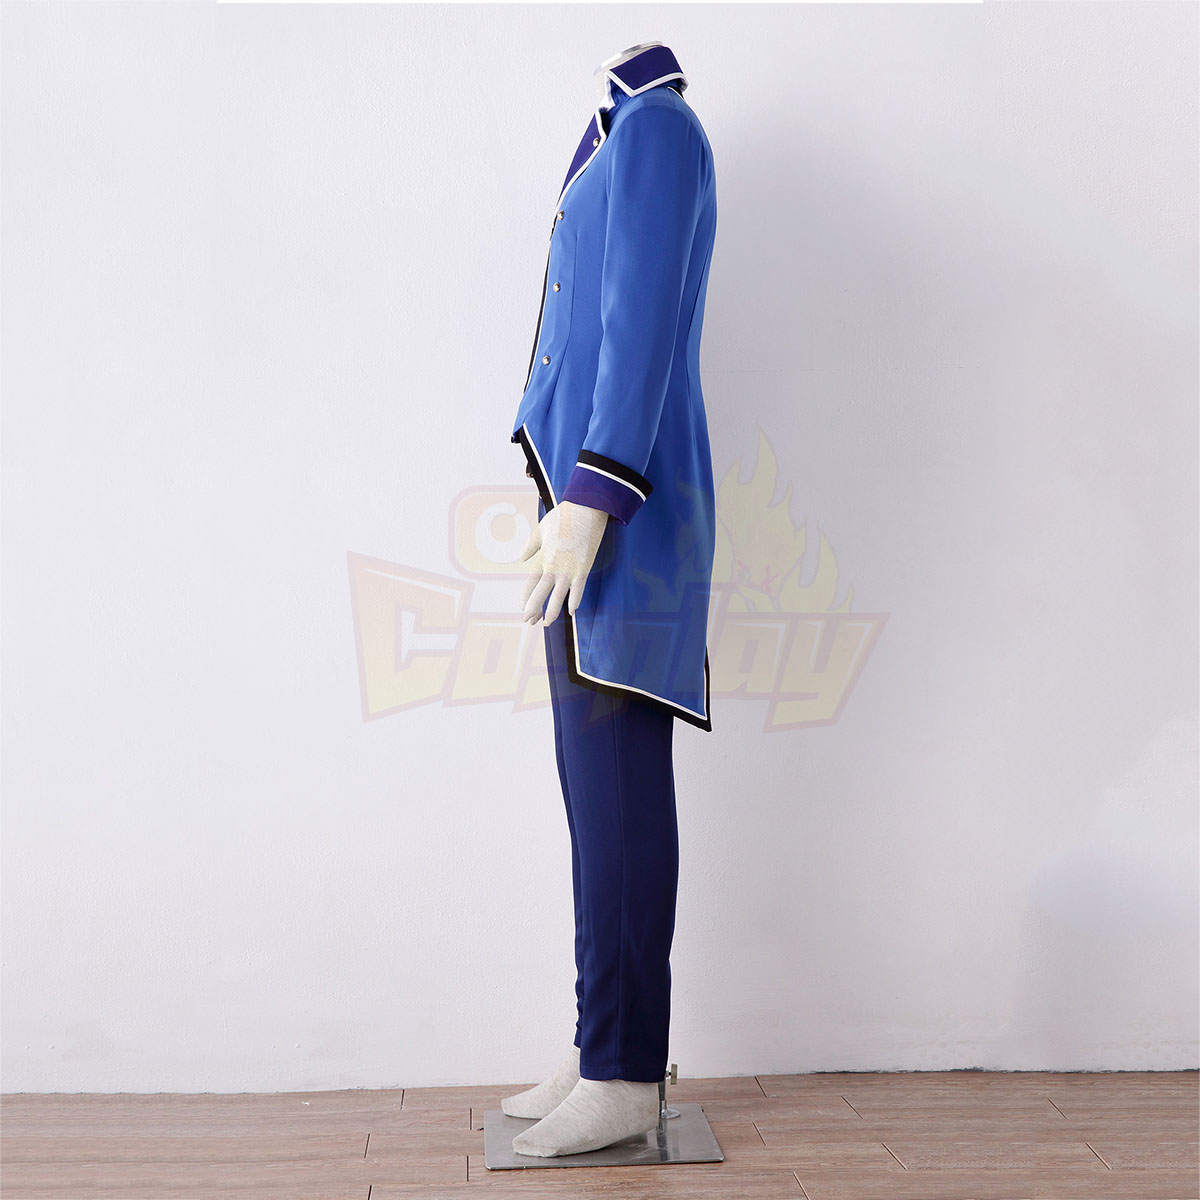 K Blue Organization Uniforms Cosplay Costumes Deluxe Edition